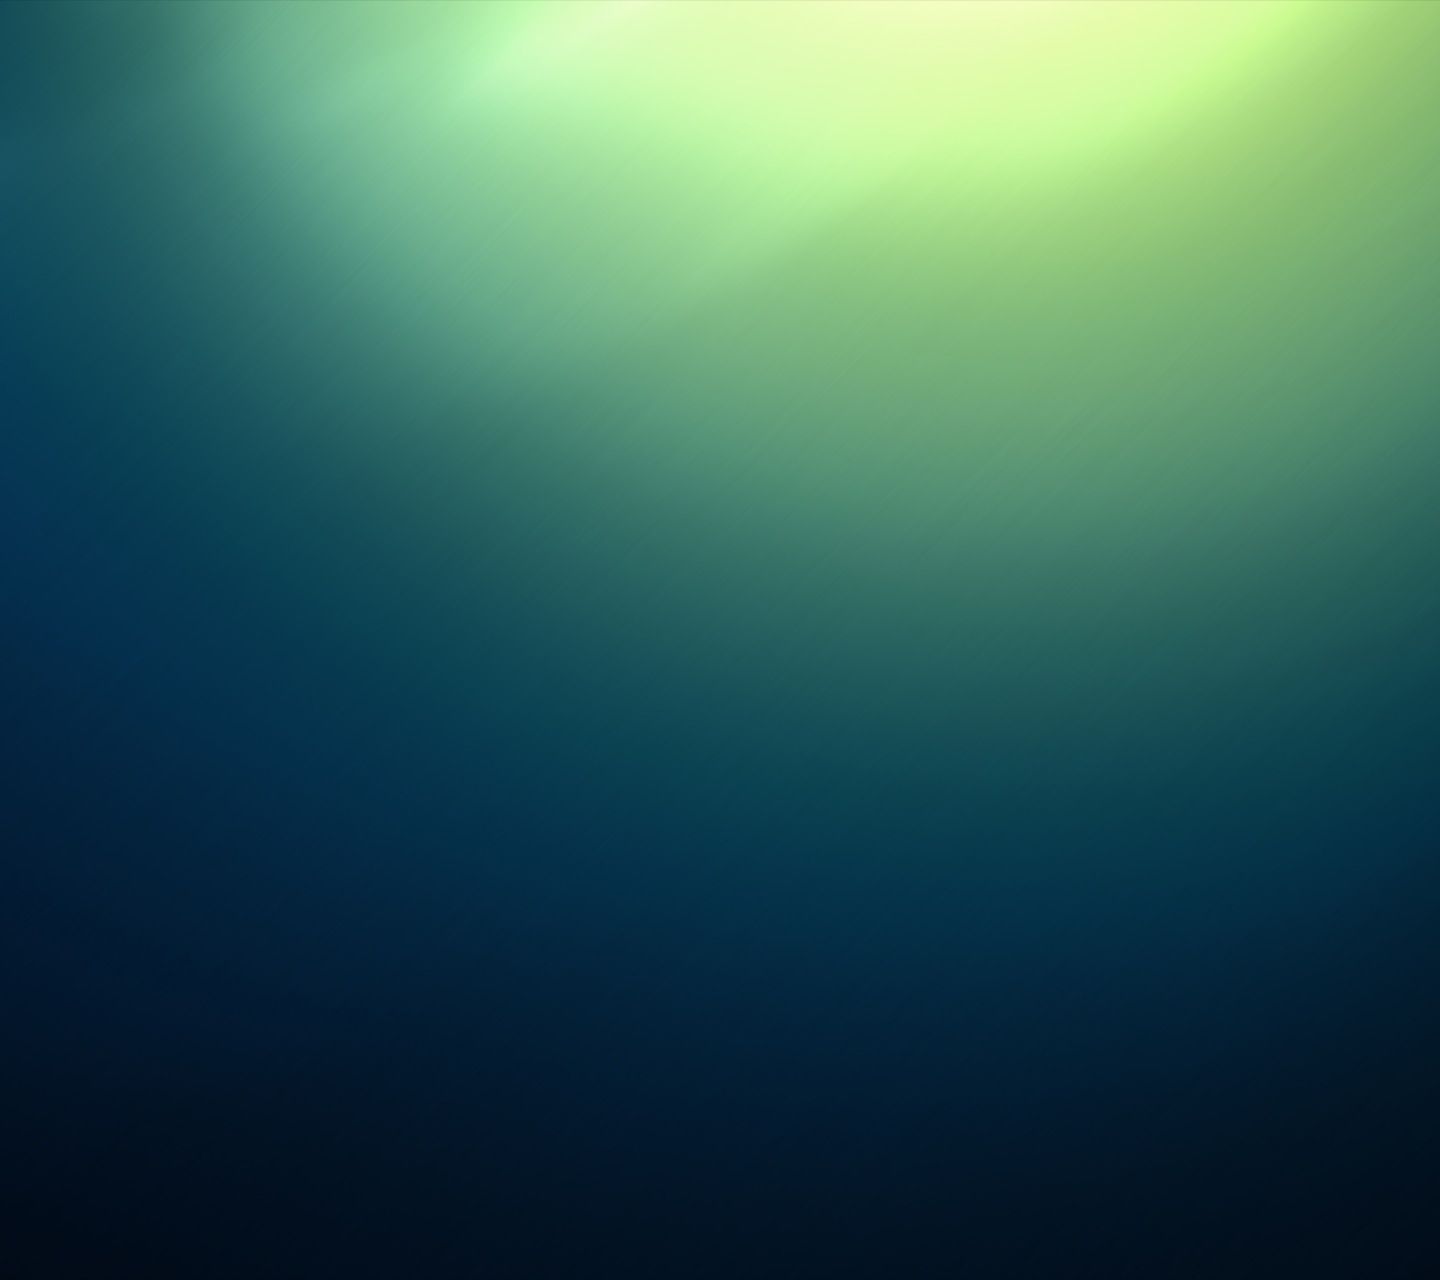 Gallery for - android jelly bean stock wallpaper